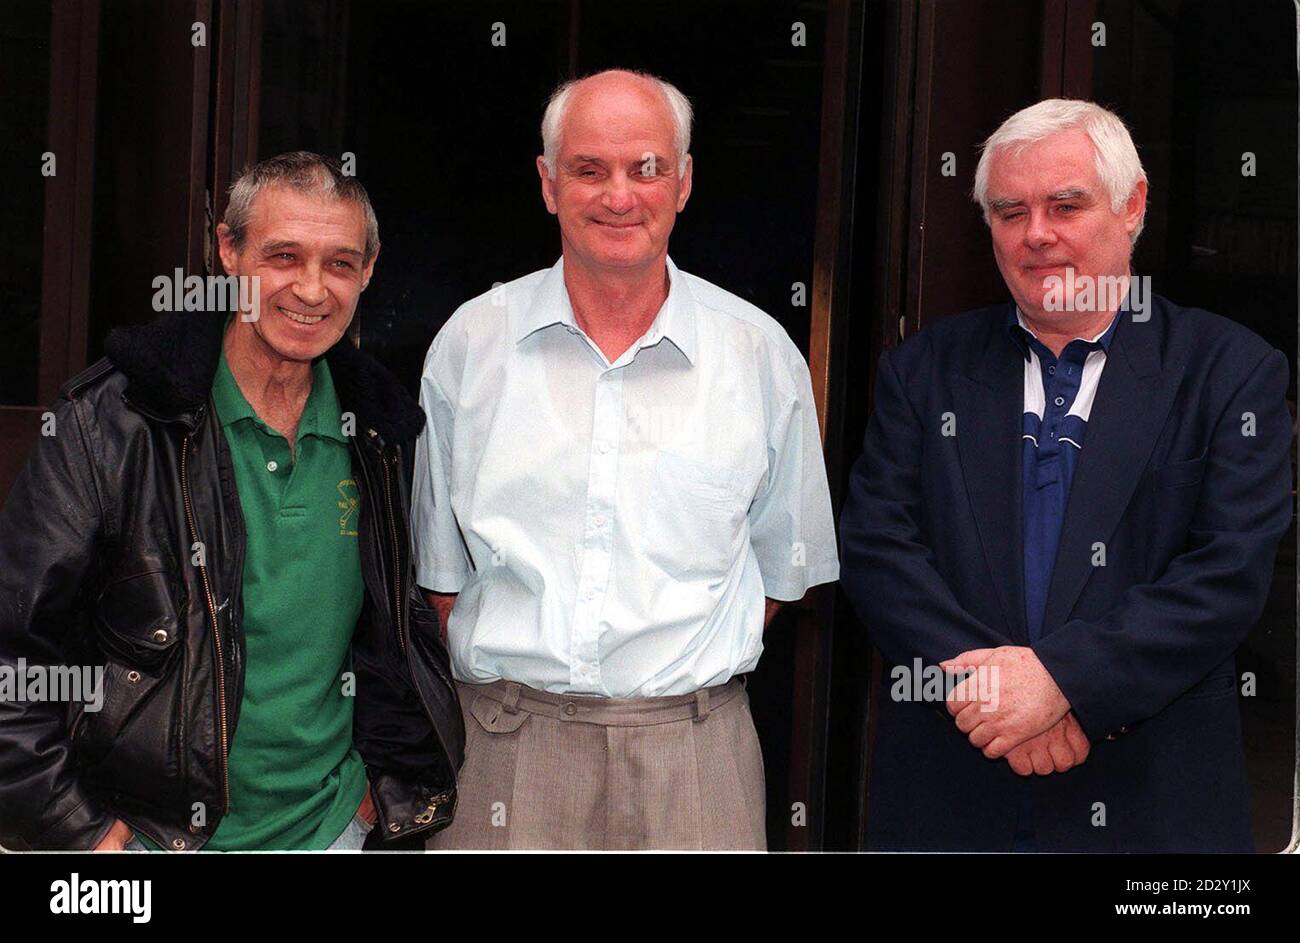 Three of the Birmingham Six, the group wrongly convicted for an IRA pub bombing in 1974 and cleared in 1991 by the Court of Appeal, arrive  at the Home Office this morning (Thursday) to present a letter to Home Secretary Jack Straw requesting final compensation after a six-and-a-half-year battle. (l/r) Paddy Hill, Hugh Callaghan and Billy Power. See PA Story LEGAL Six. Photo by David Westing. Stock Photo